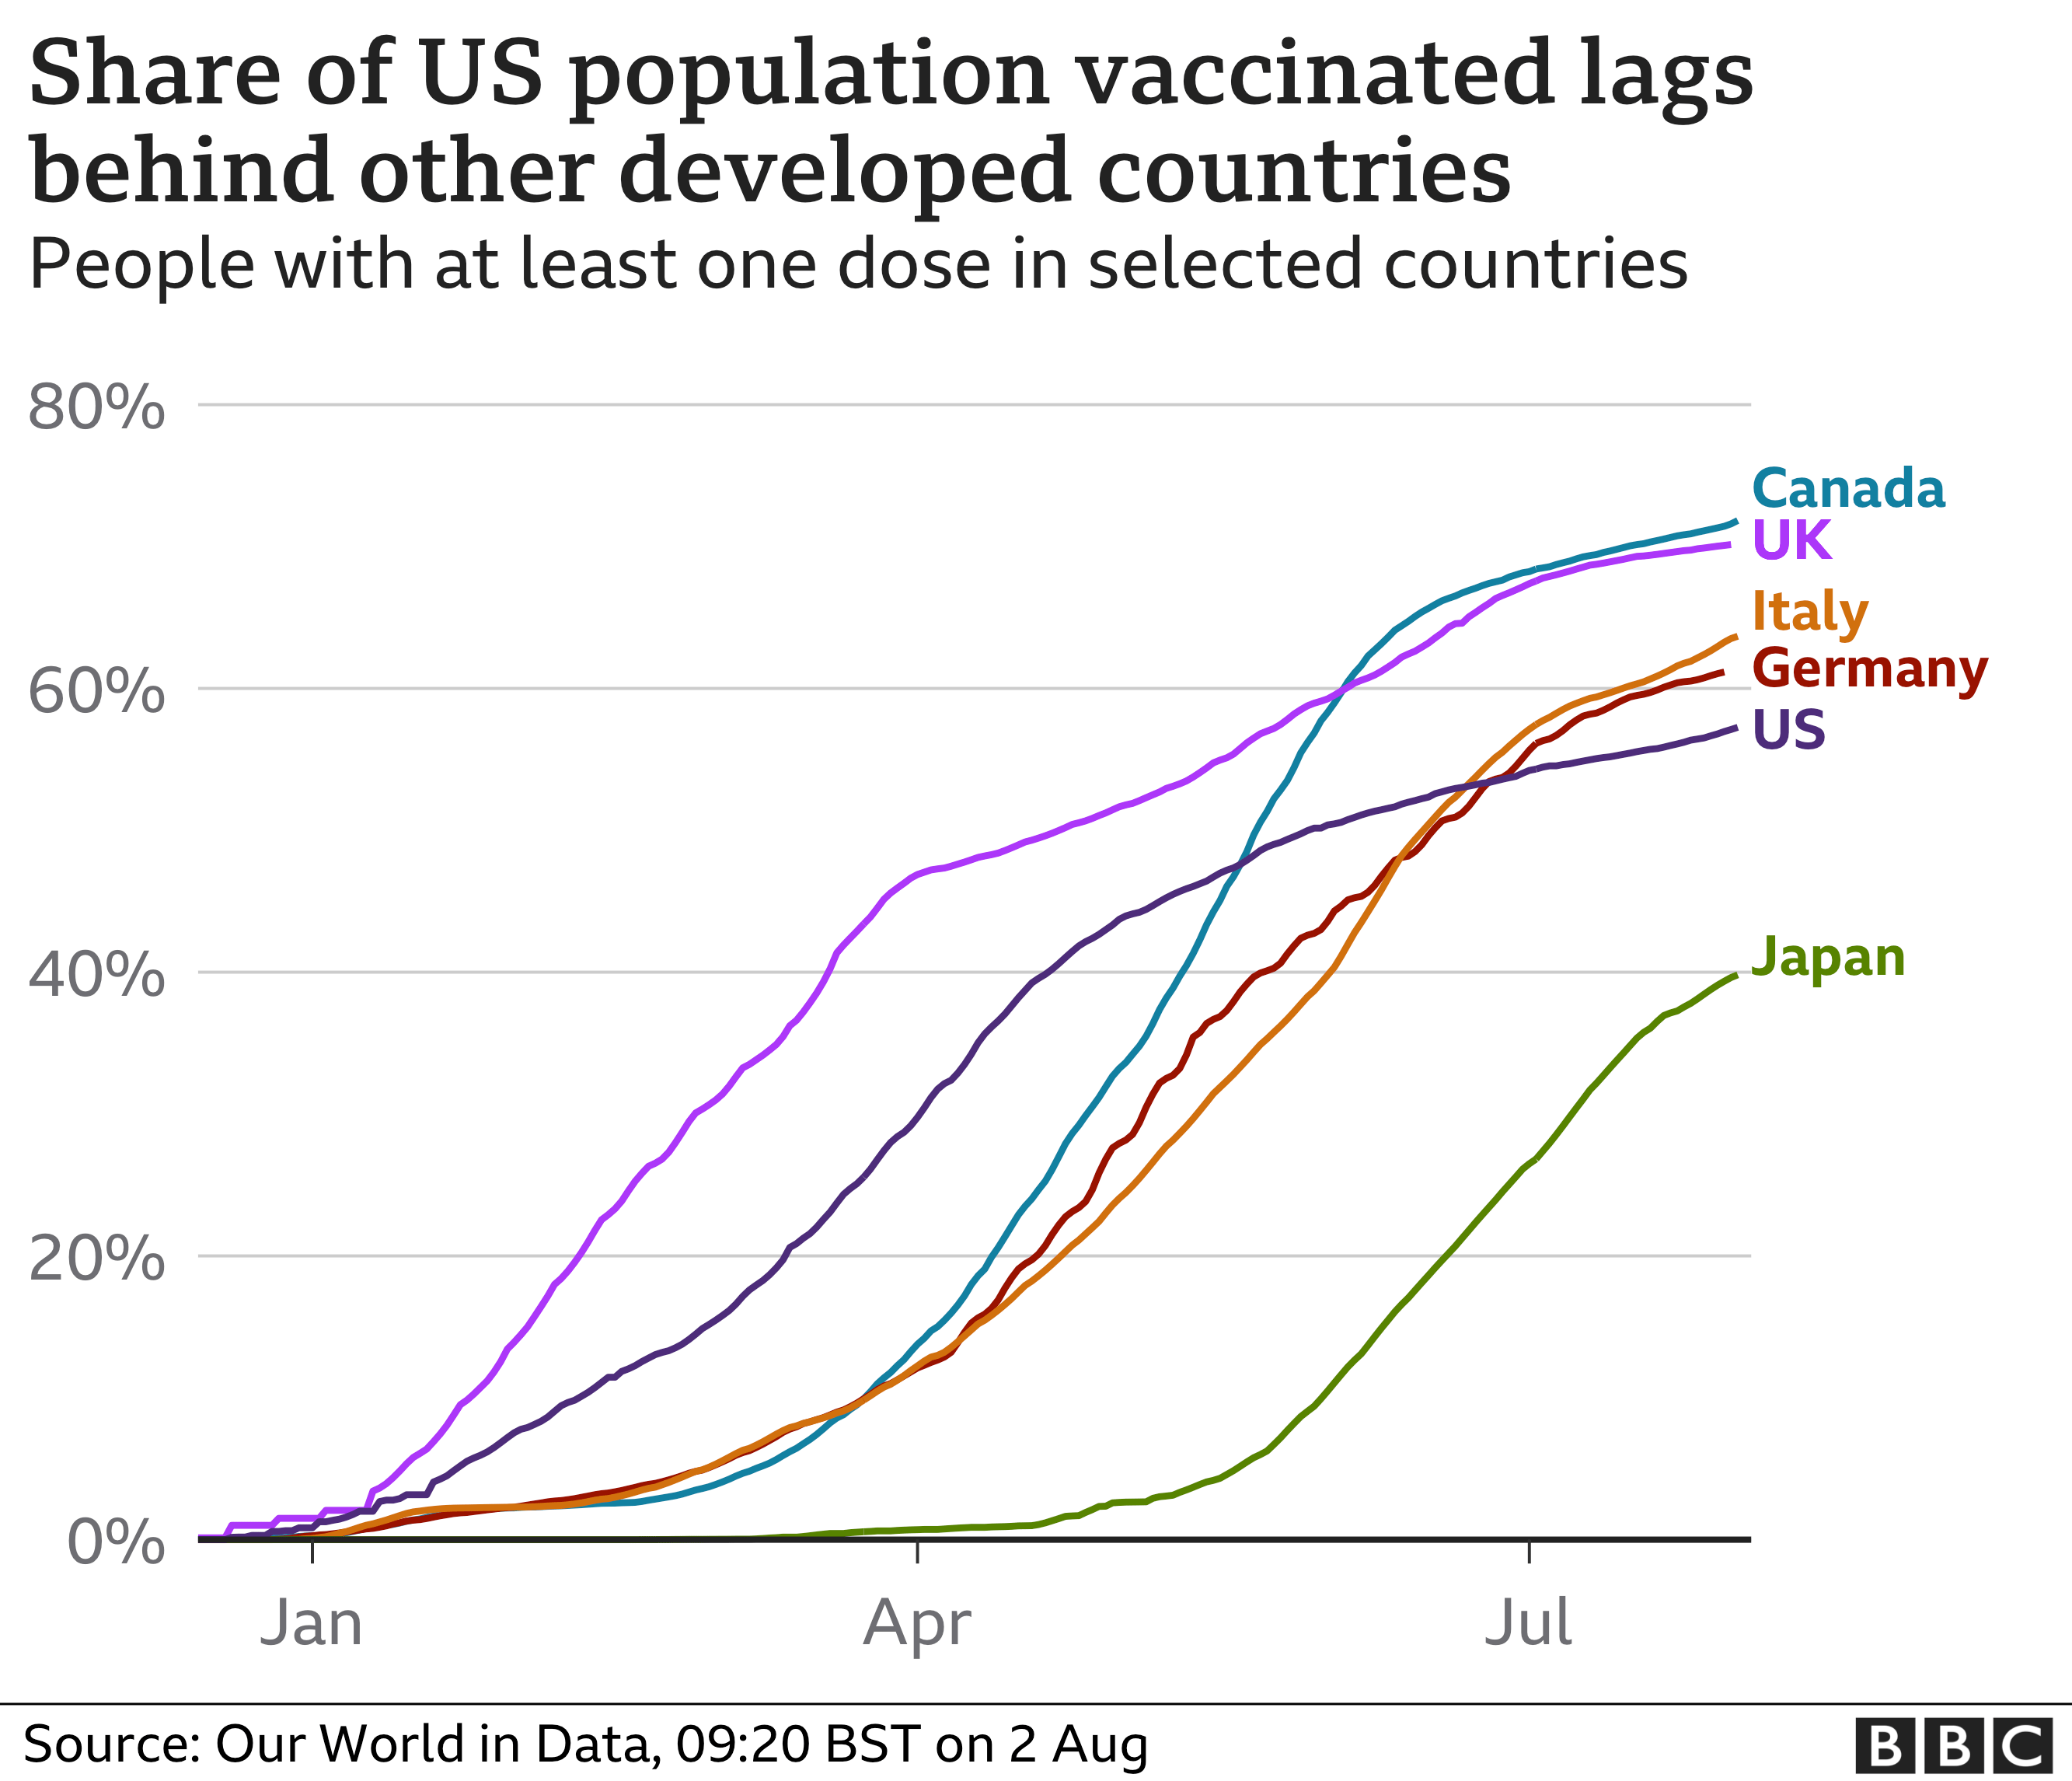 Vaccination rates in developed countries